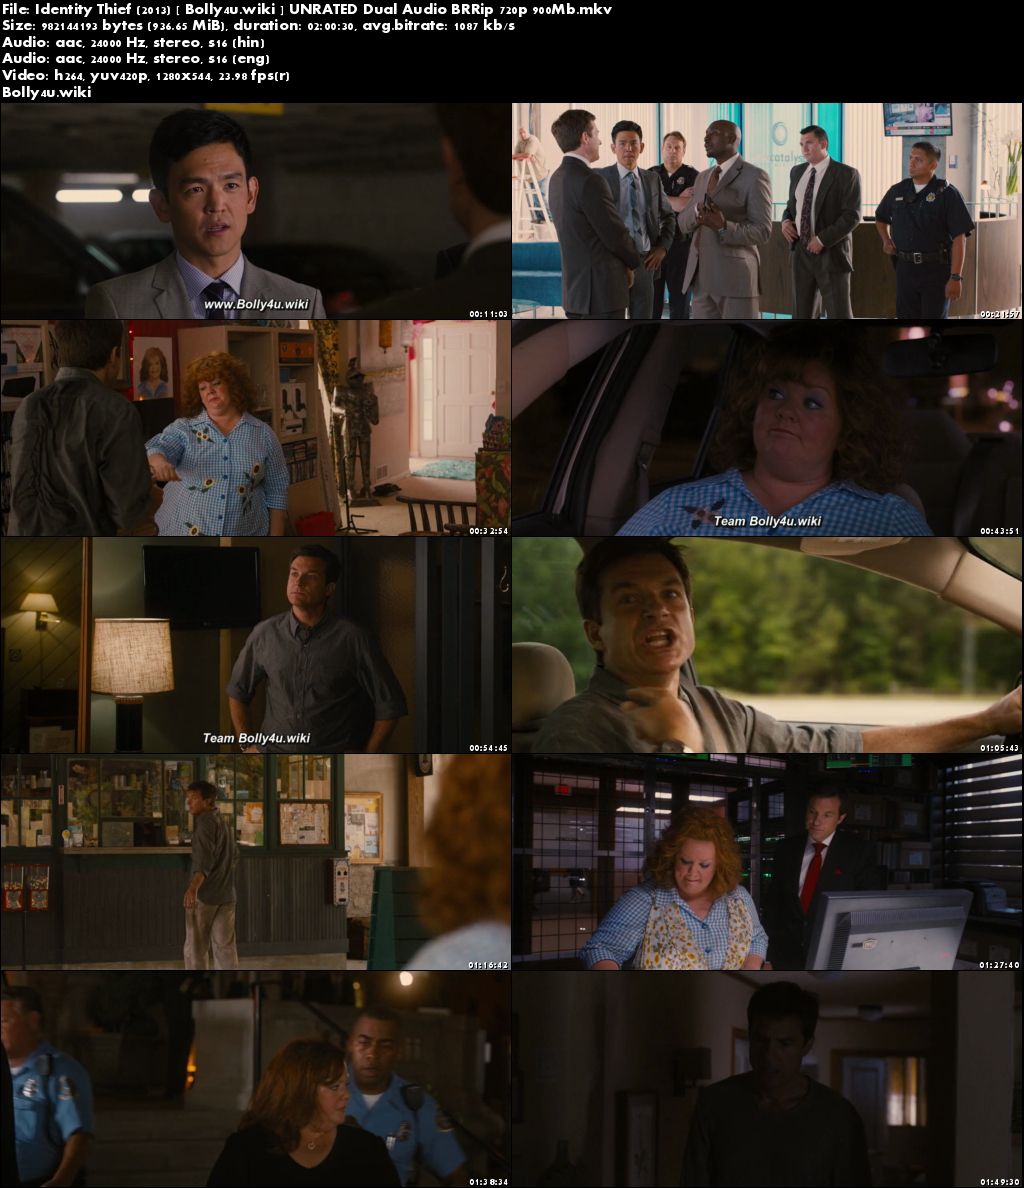 Identity Thief 2013 BRRip 900MB UNRATED Hindi Dual Audio 720p Download